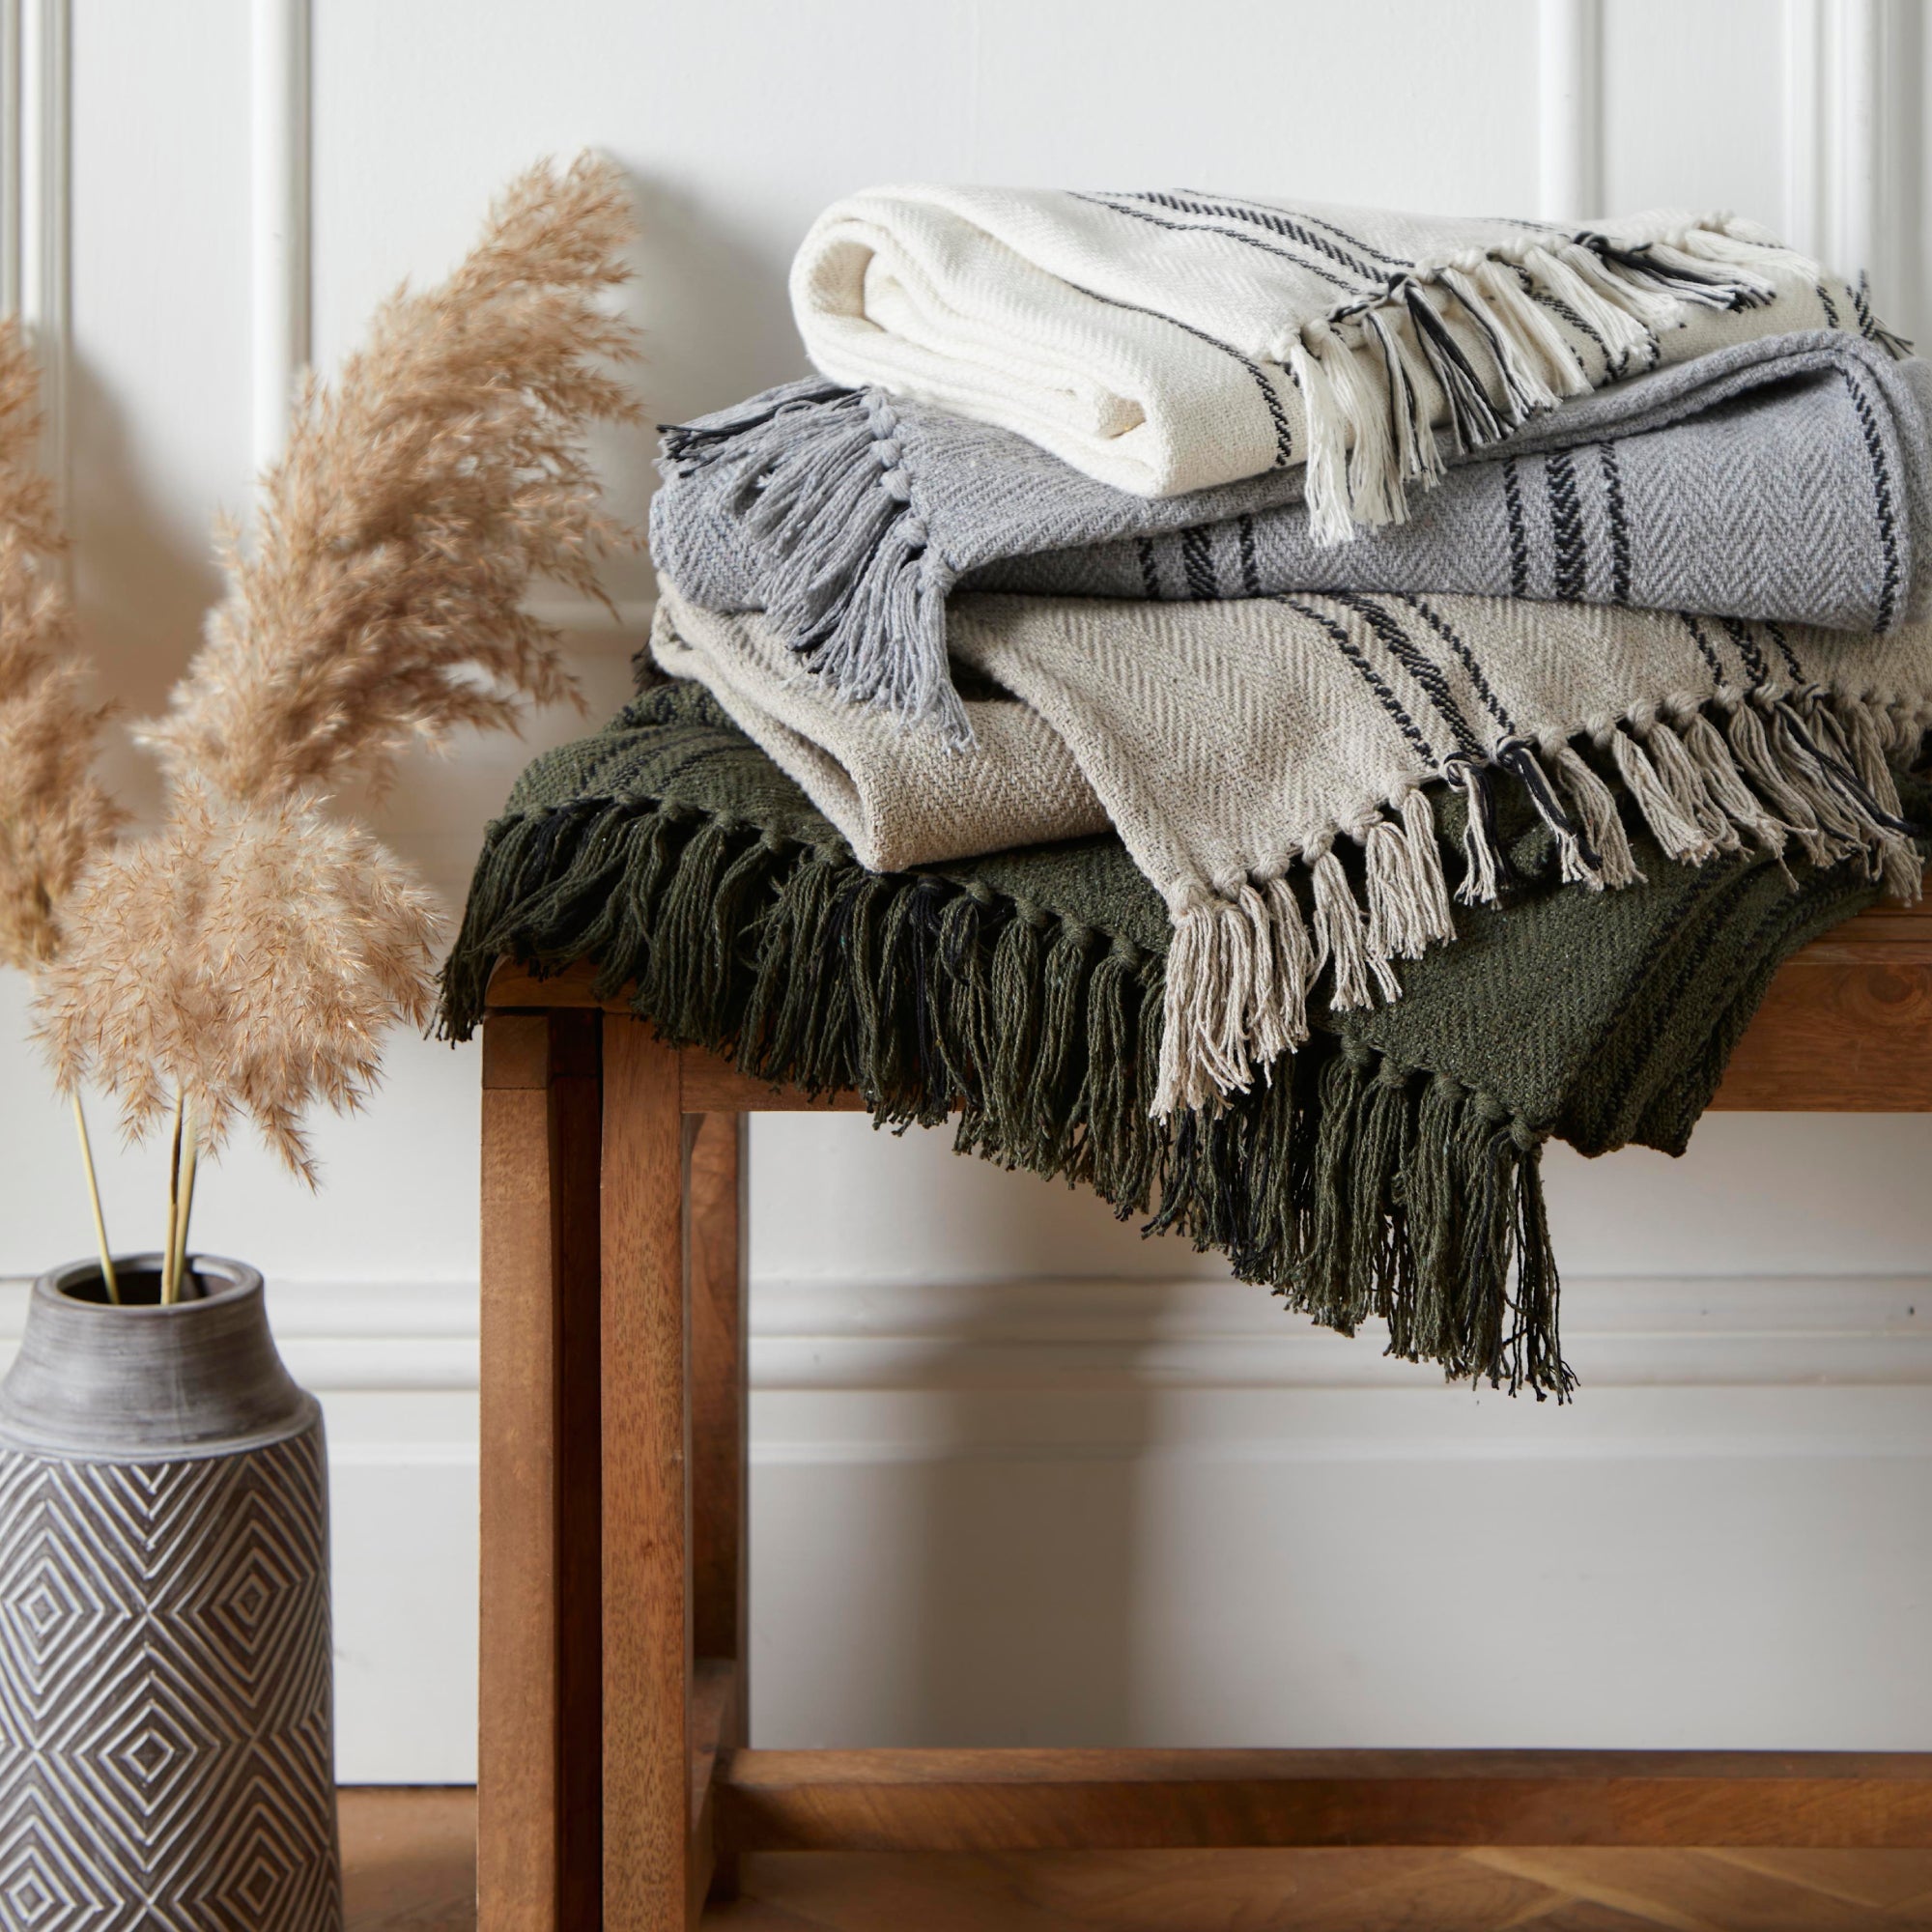 Drift Home Brinley Recycled Cotton Throw - Natural